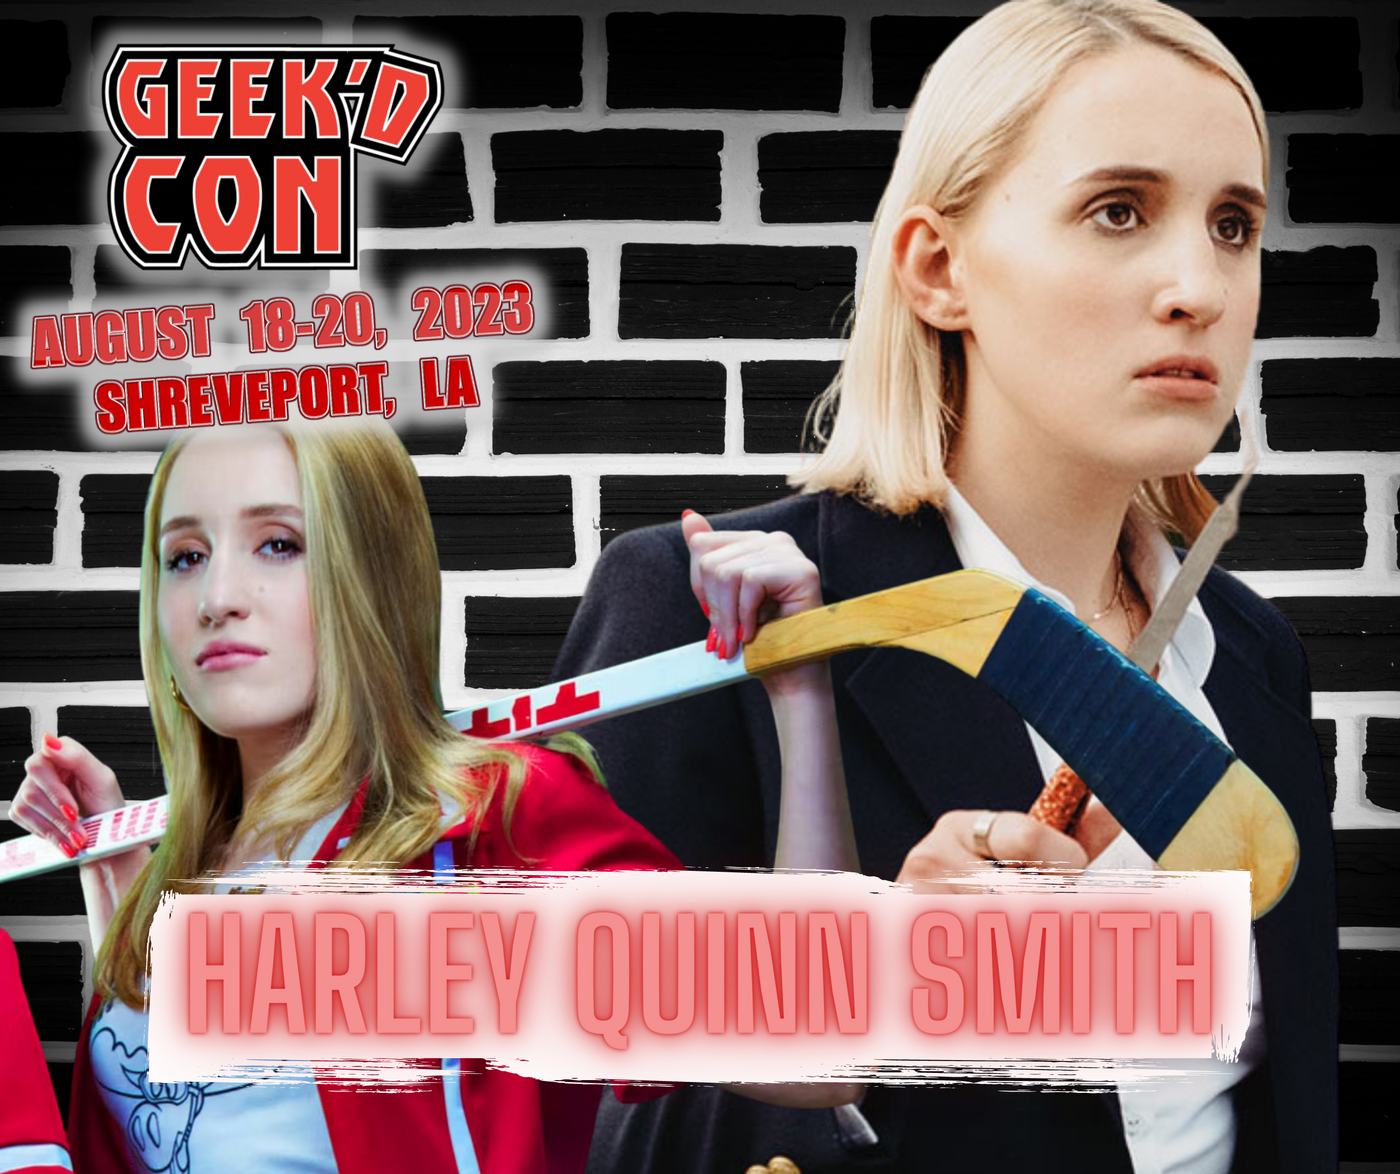 Harley Quinn Smith Official Autograph Mail-In Service - Geek'd Con 2023